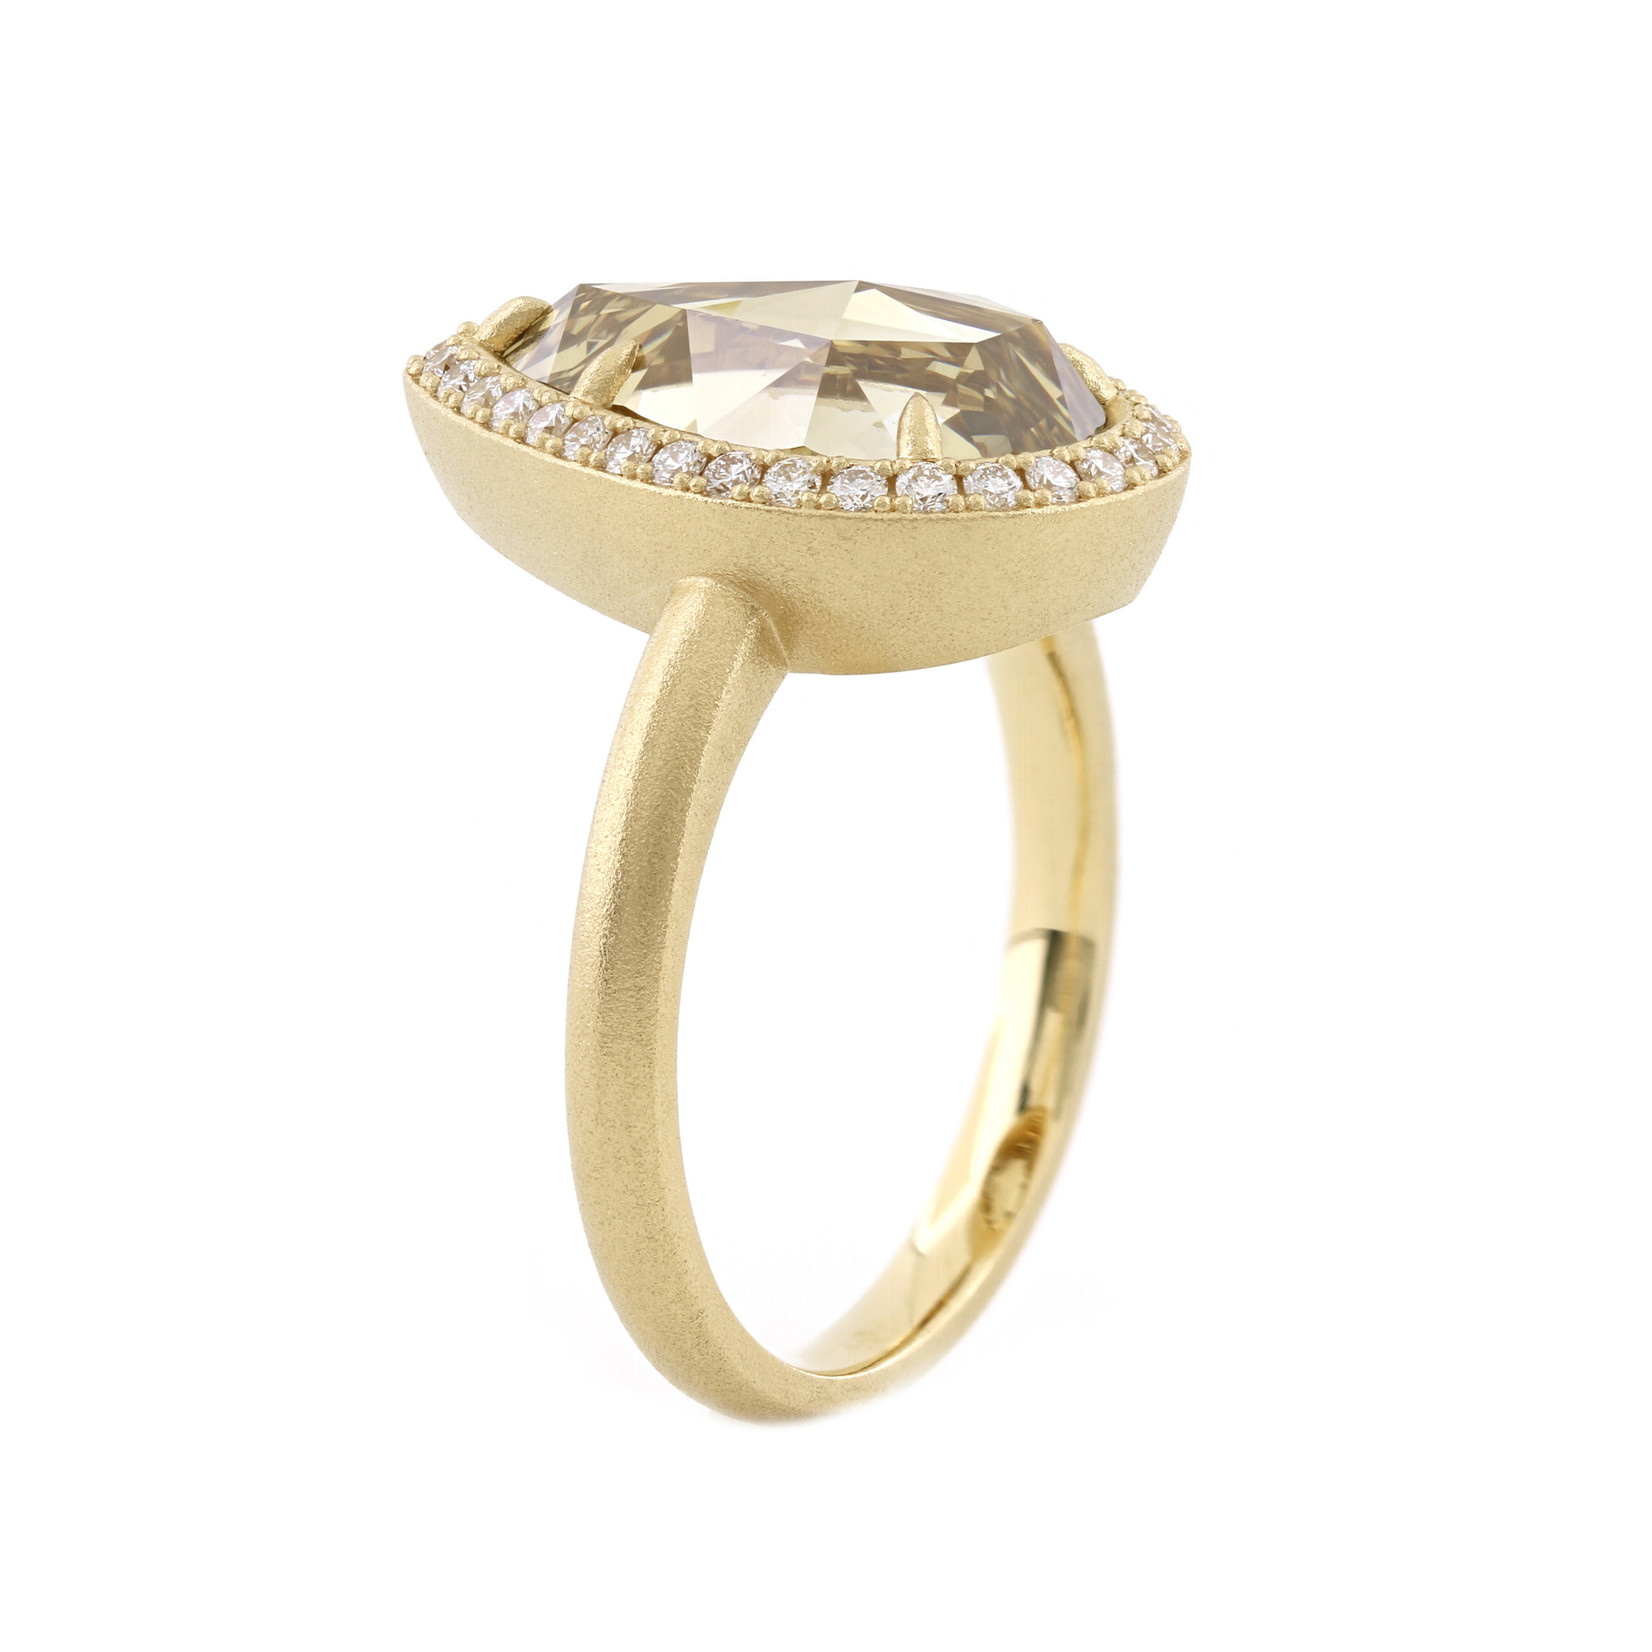 Baxter Moerman Alexis Ring with Rose Cut Champagne Diamond